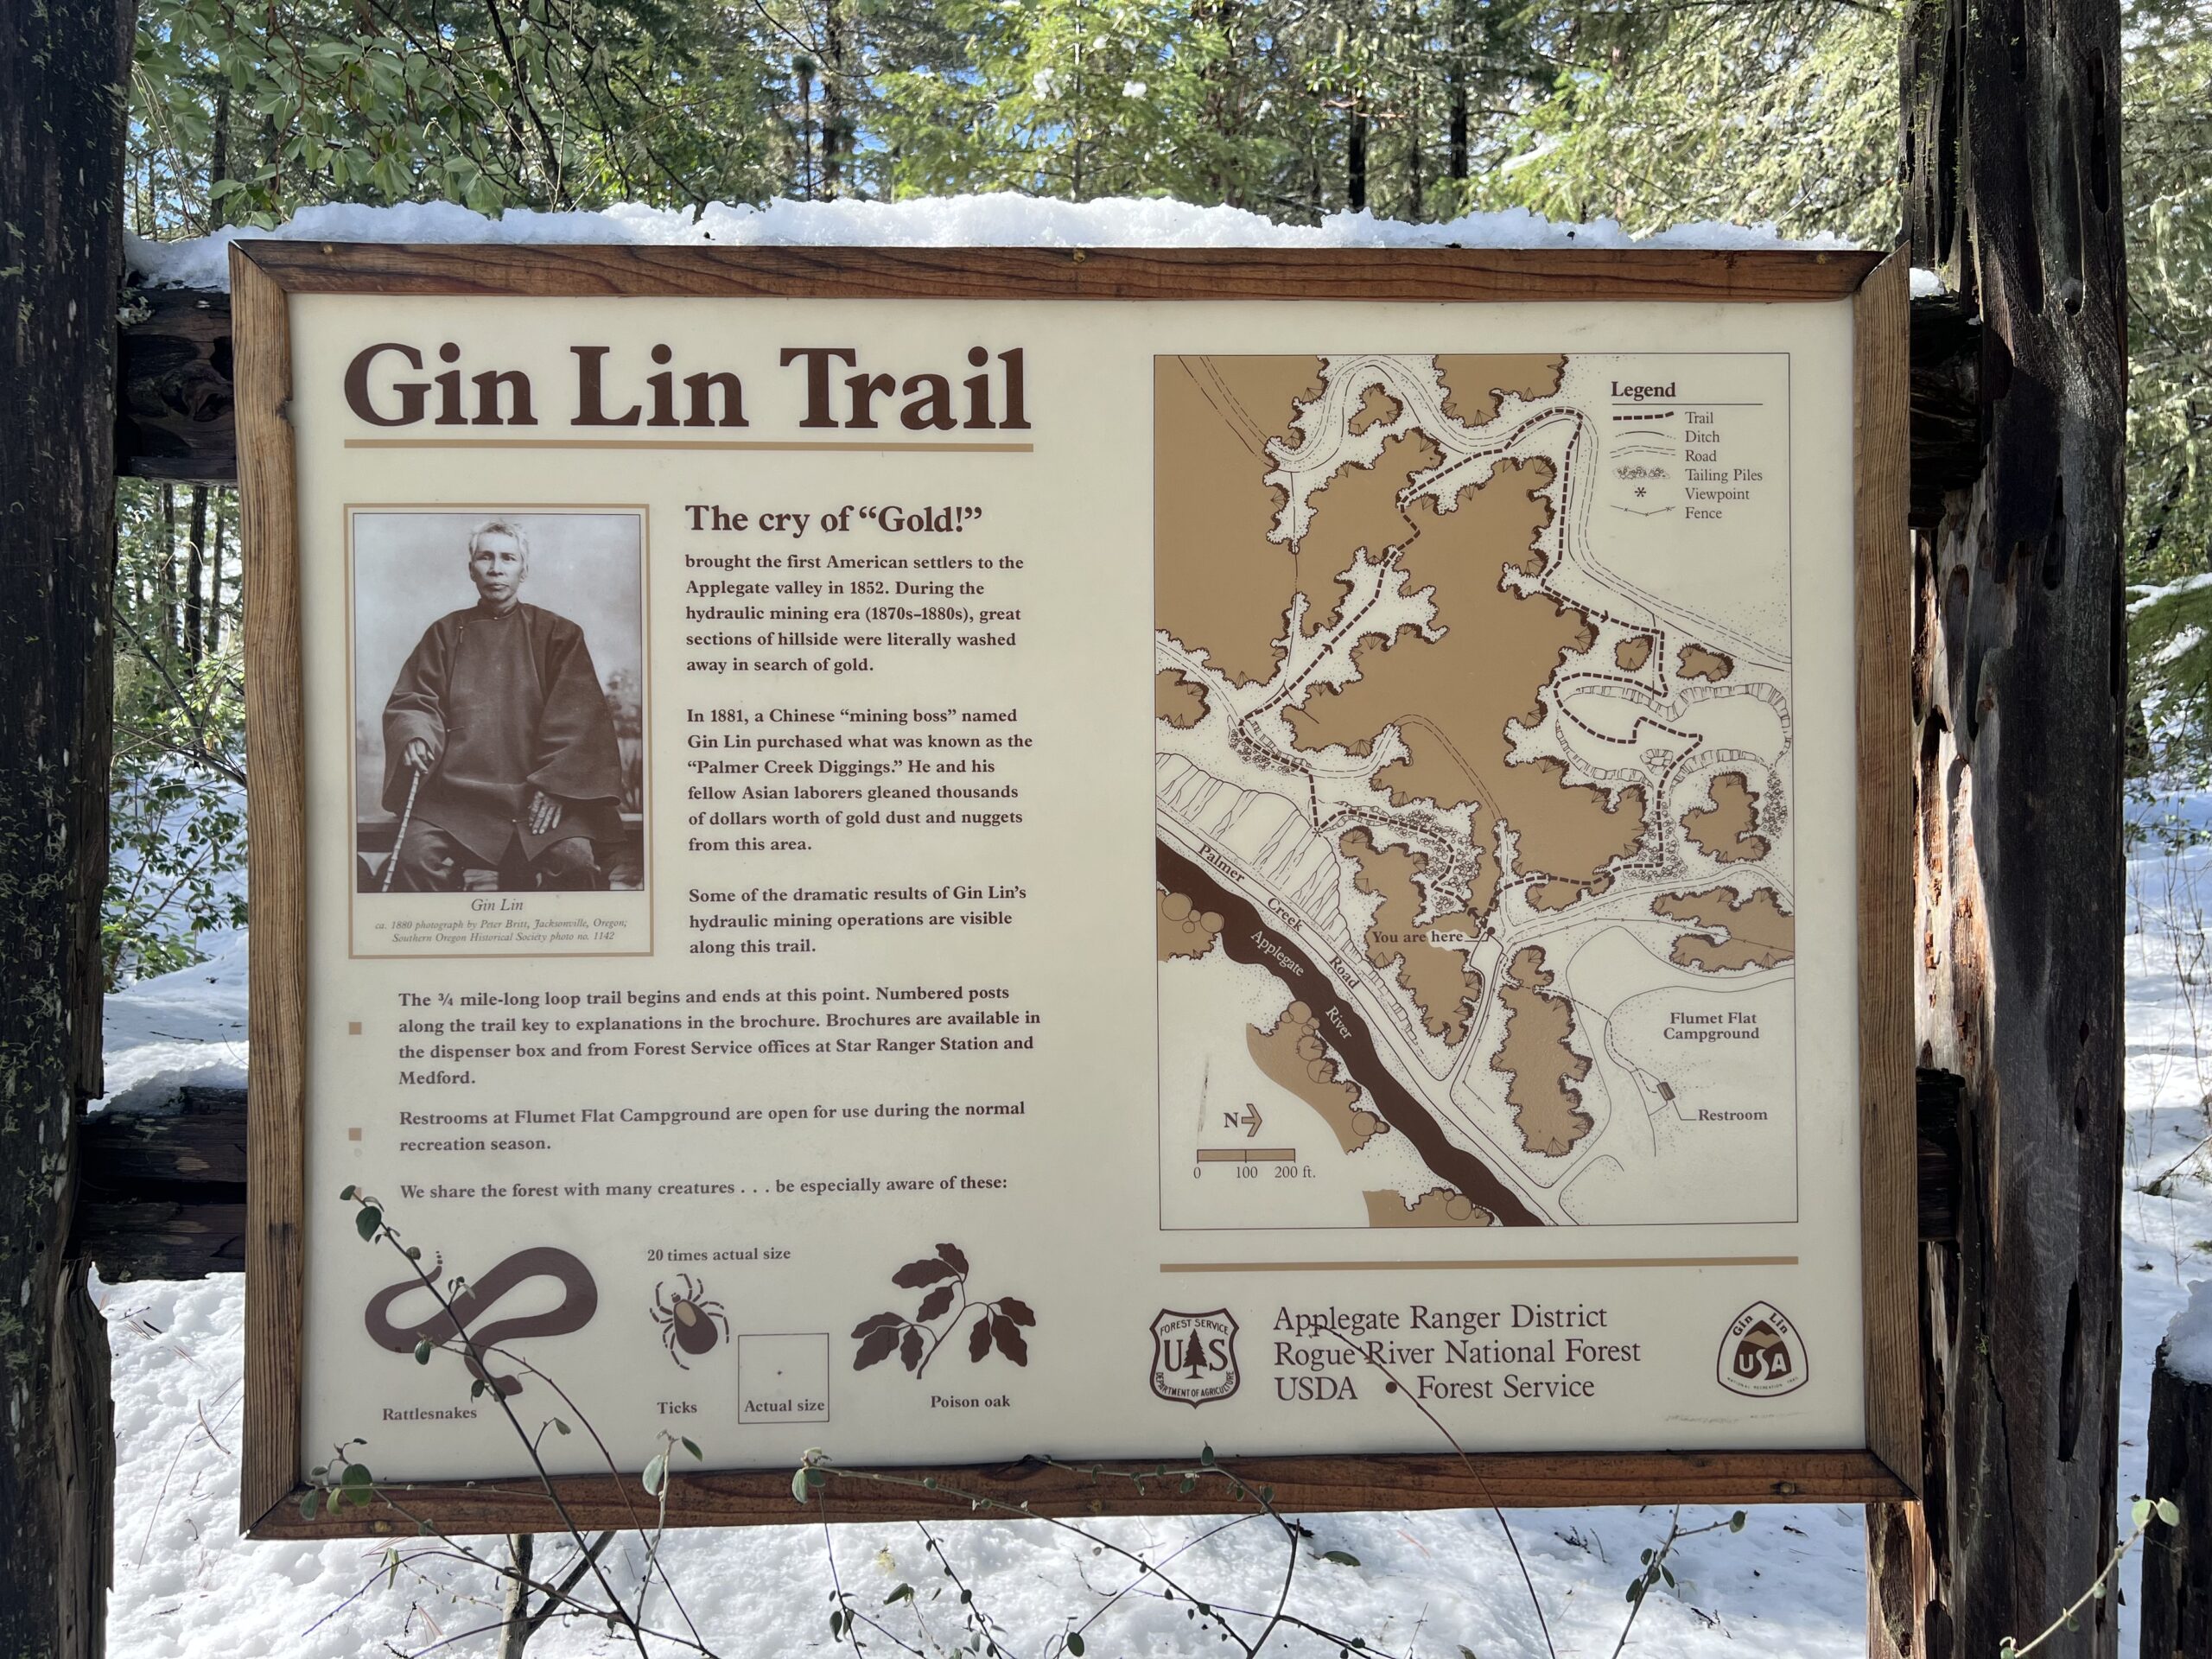 Gin Lin Trail map and history on a sign in front of the trail in a snowy Grants Pass